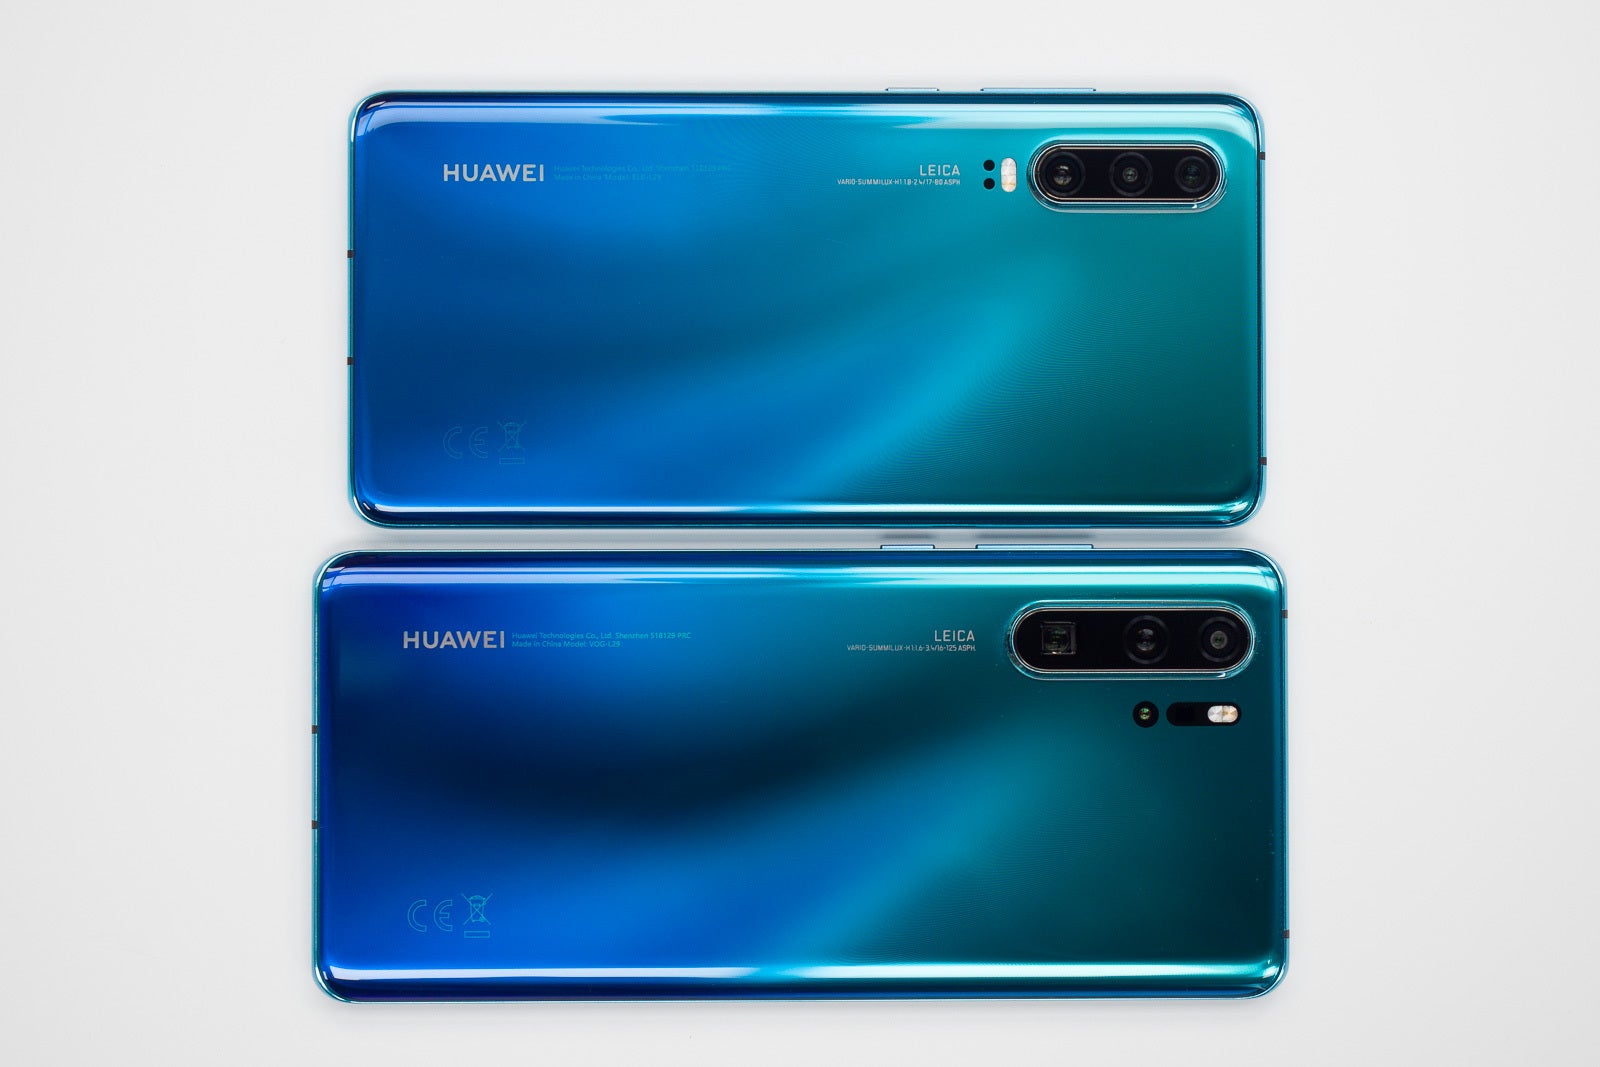 Huawei P30 series - Huawei stays strong in China as Apple tumbles and market shrinks